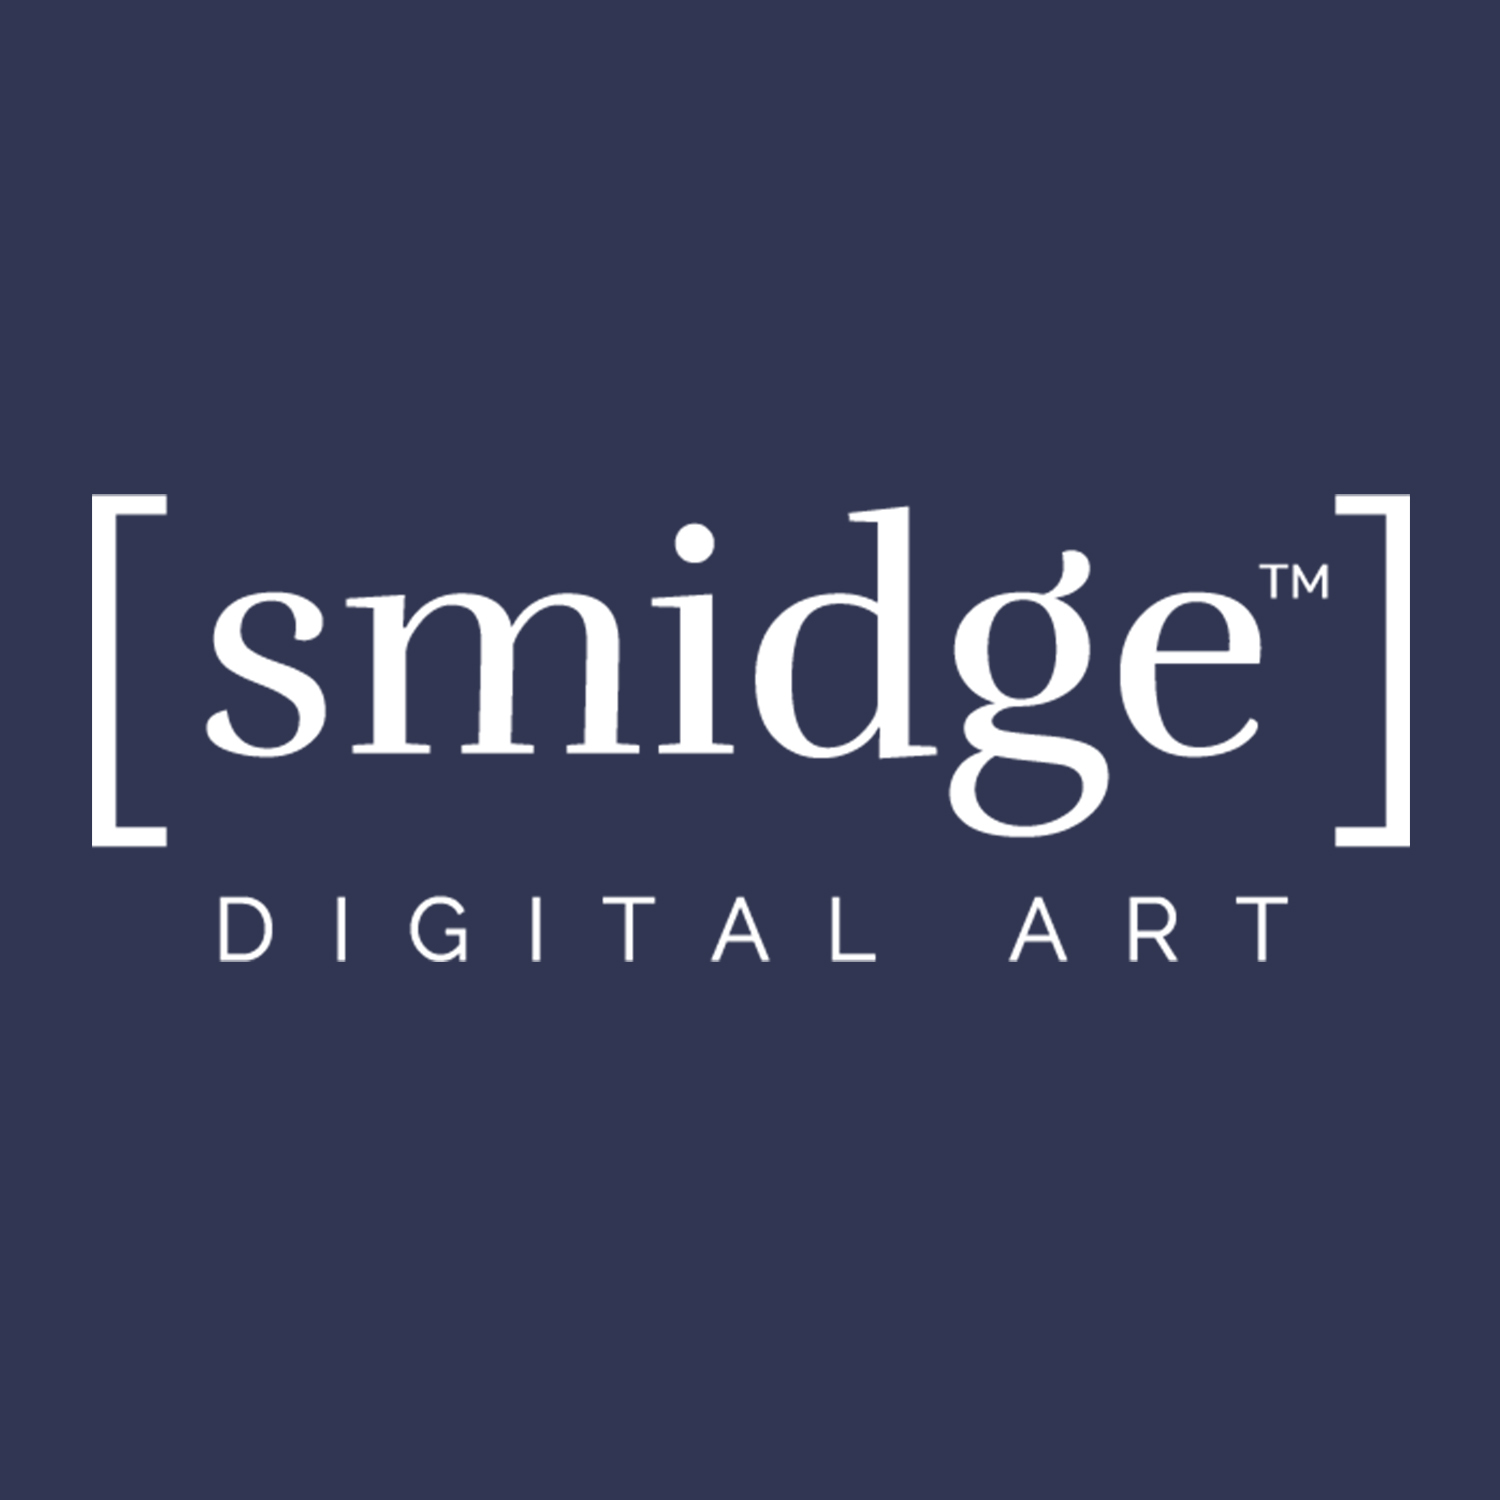 Smidge Digital Art offers just the right amount of themed embellishments and digital paper to help you create the perfect digital page to capture any theme or occasion. All digital art kits are available in universal PNG and JPG formats only. 